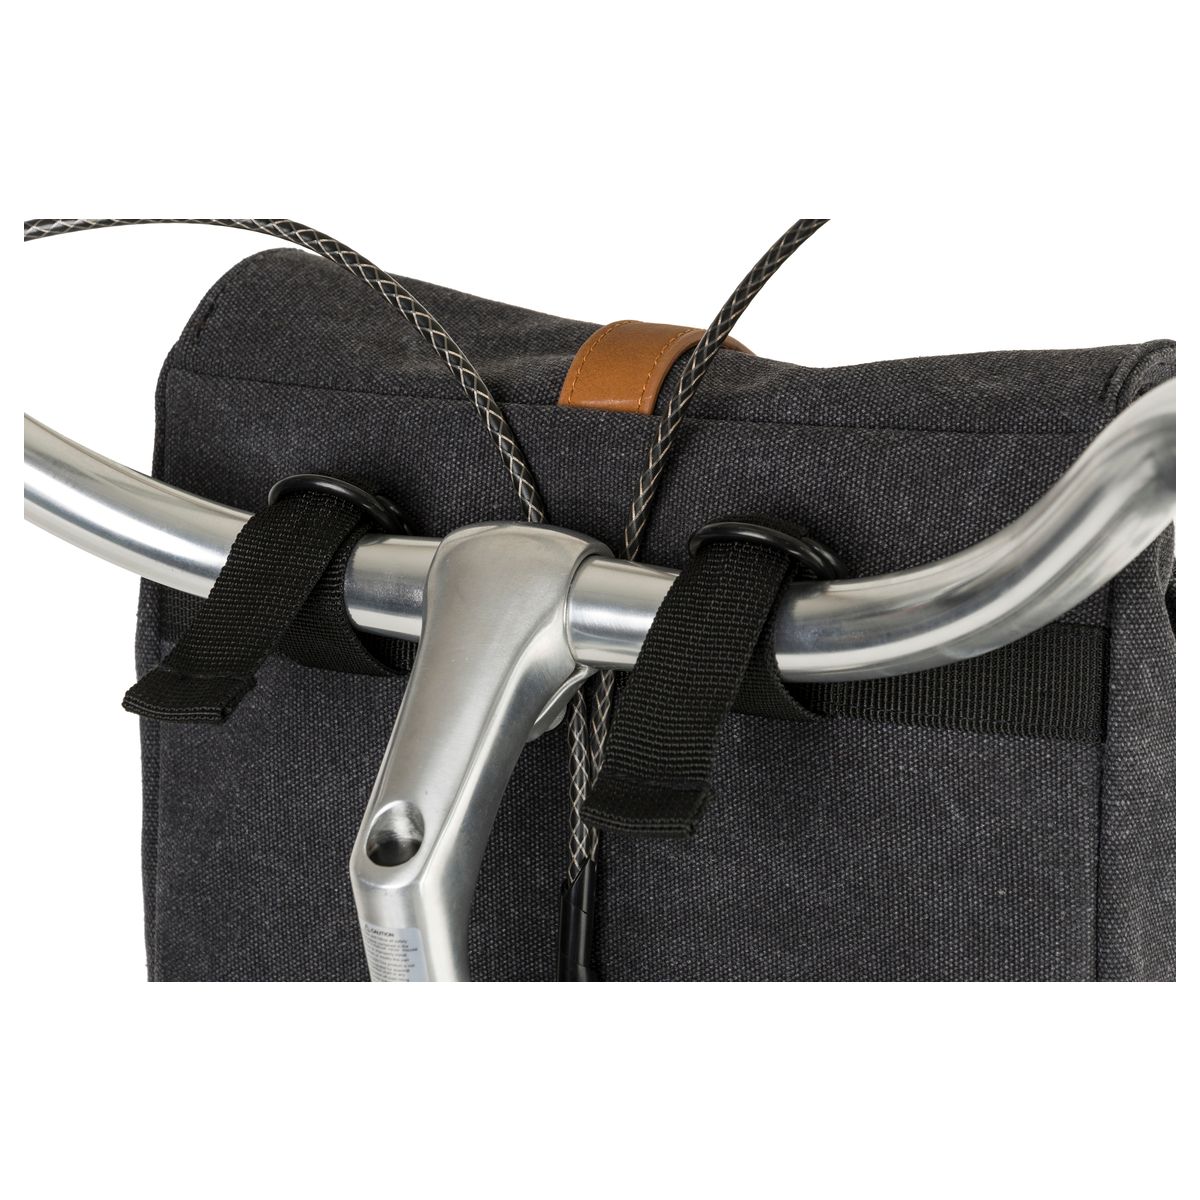 Fastrider Isas Handlebar Bag Trend Strap fit example